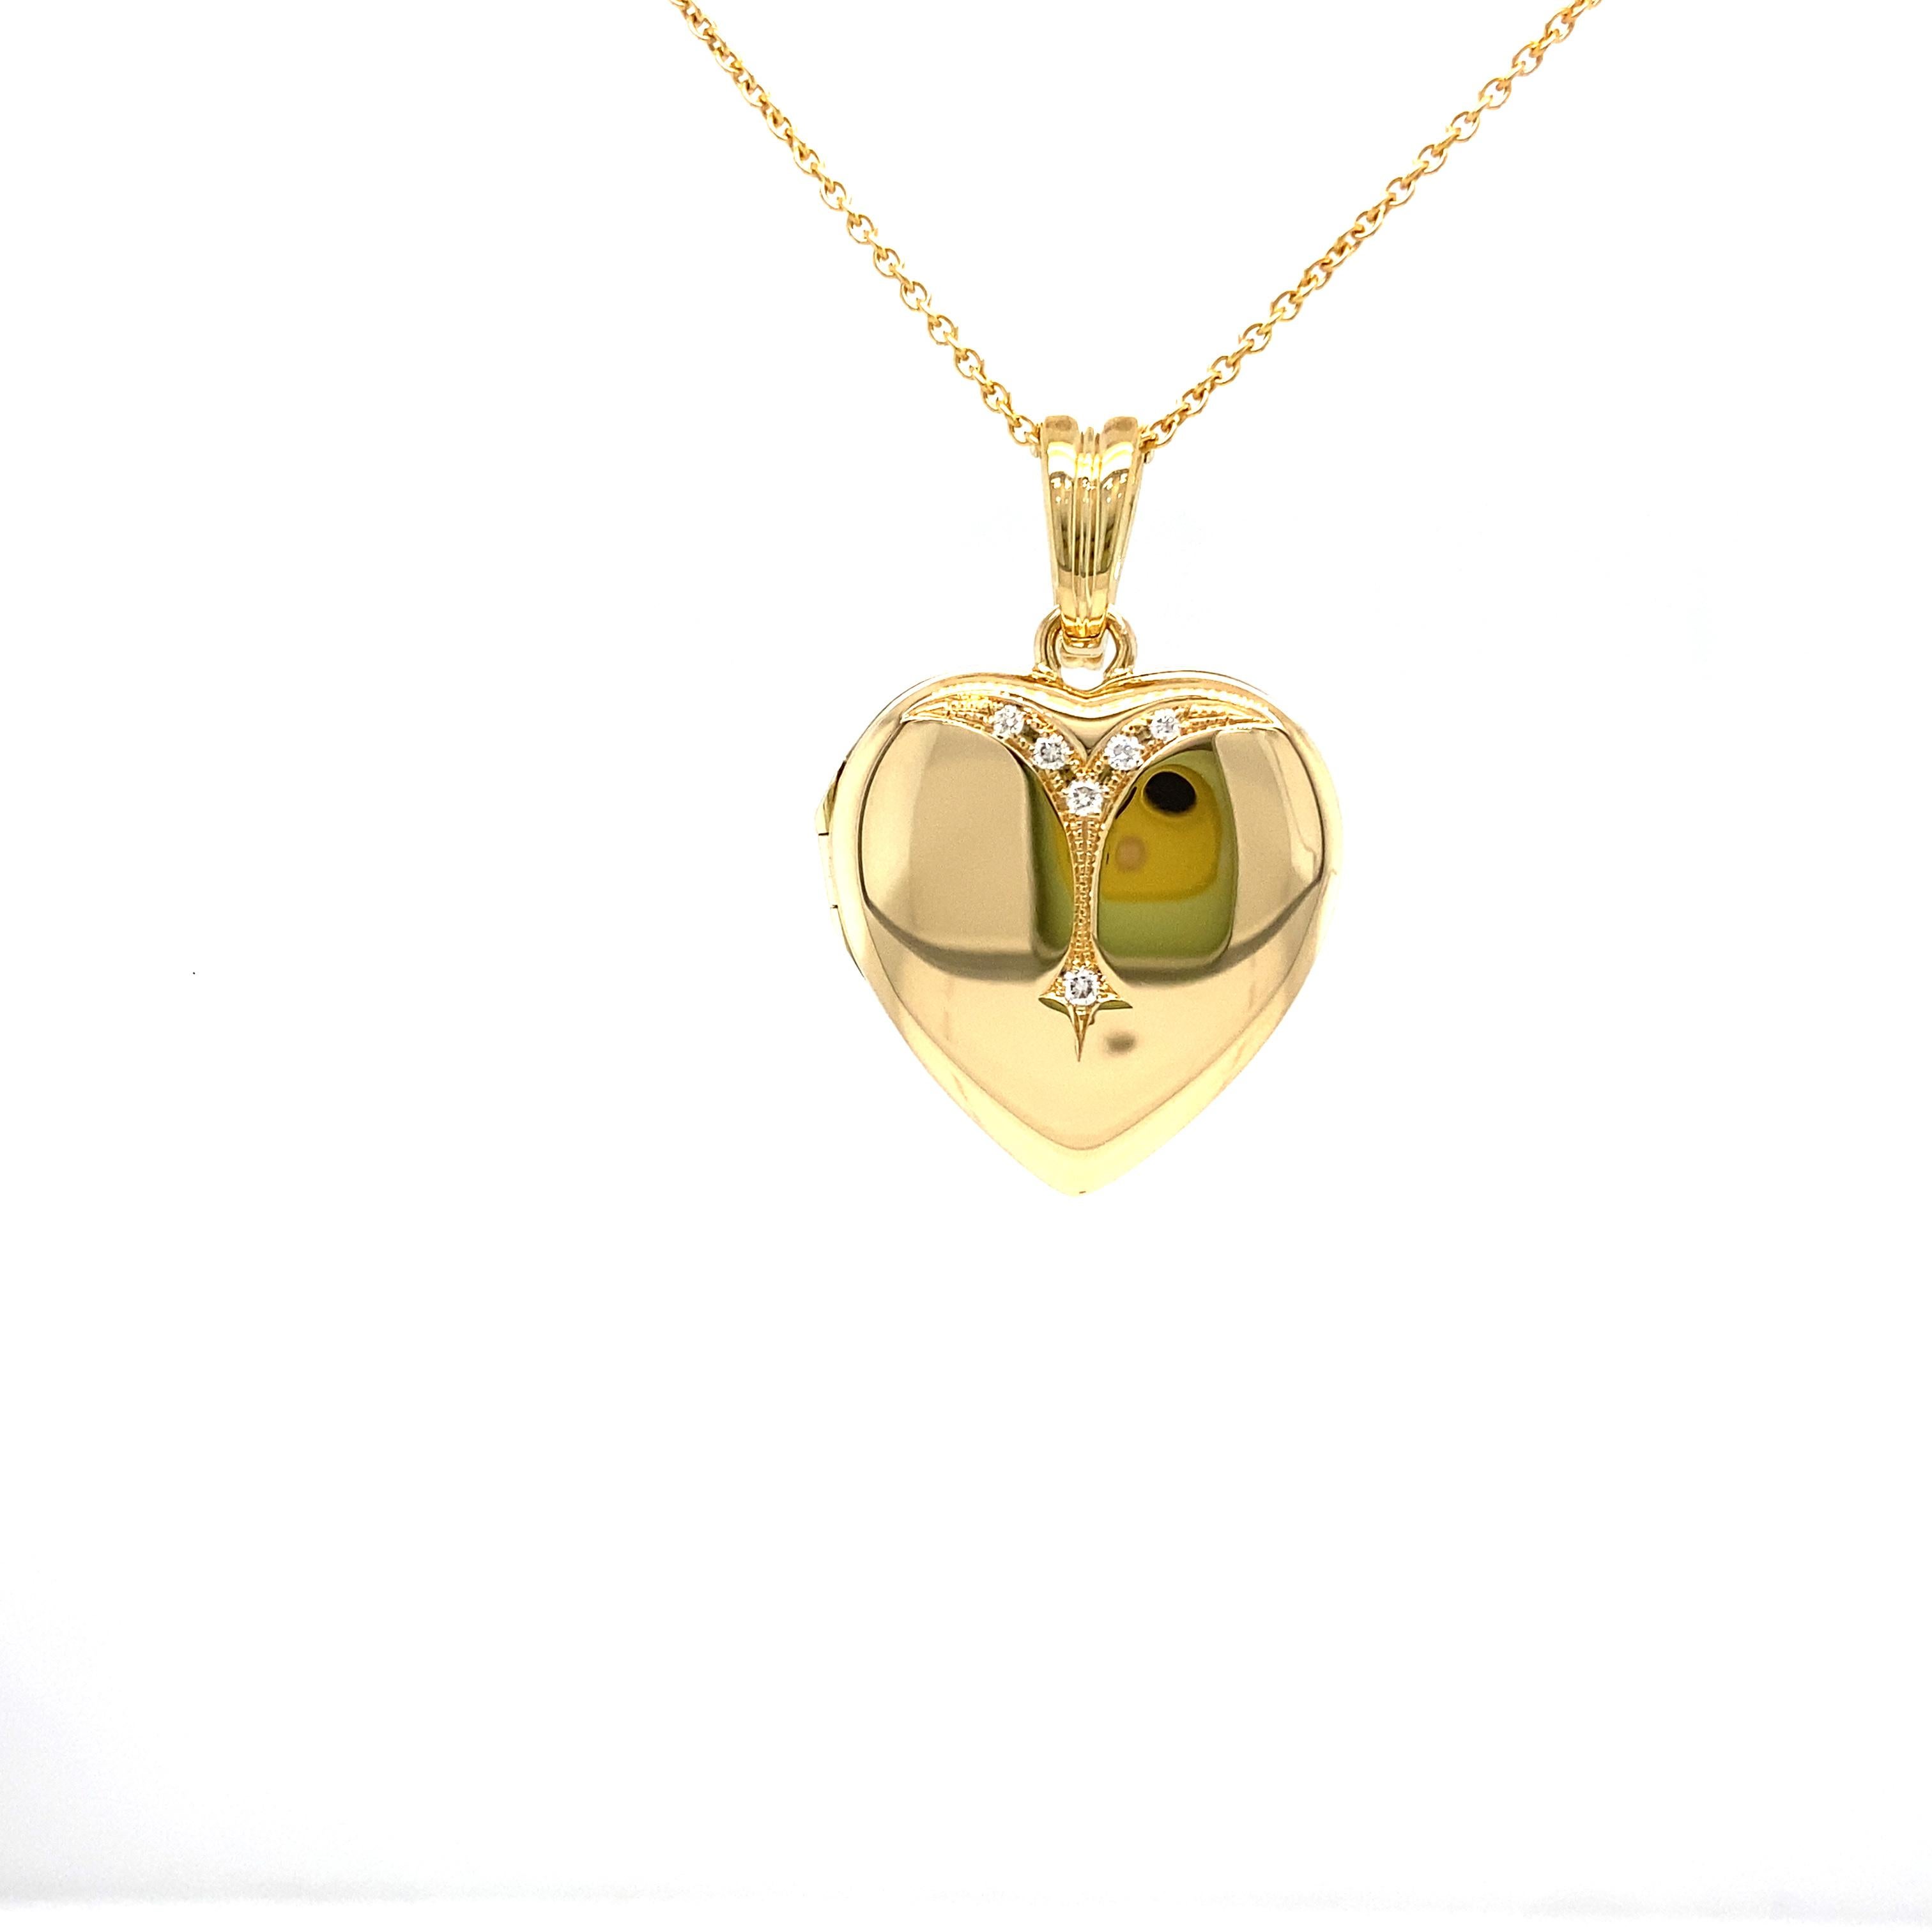 Victor Mayer customizable polished heart-shaped locket pendant 18k yellow gold, Hallmark collection, 6 Diamonds, total 0.09 ct, H VS, brilliant cut, diameter app. 22.0 mm

About the creator Victor Mayer
Victor Mayer is internationally renowned for